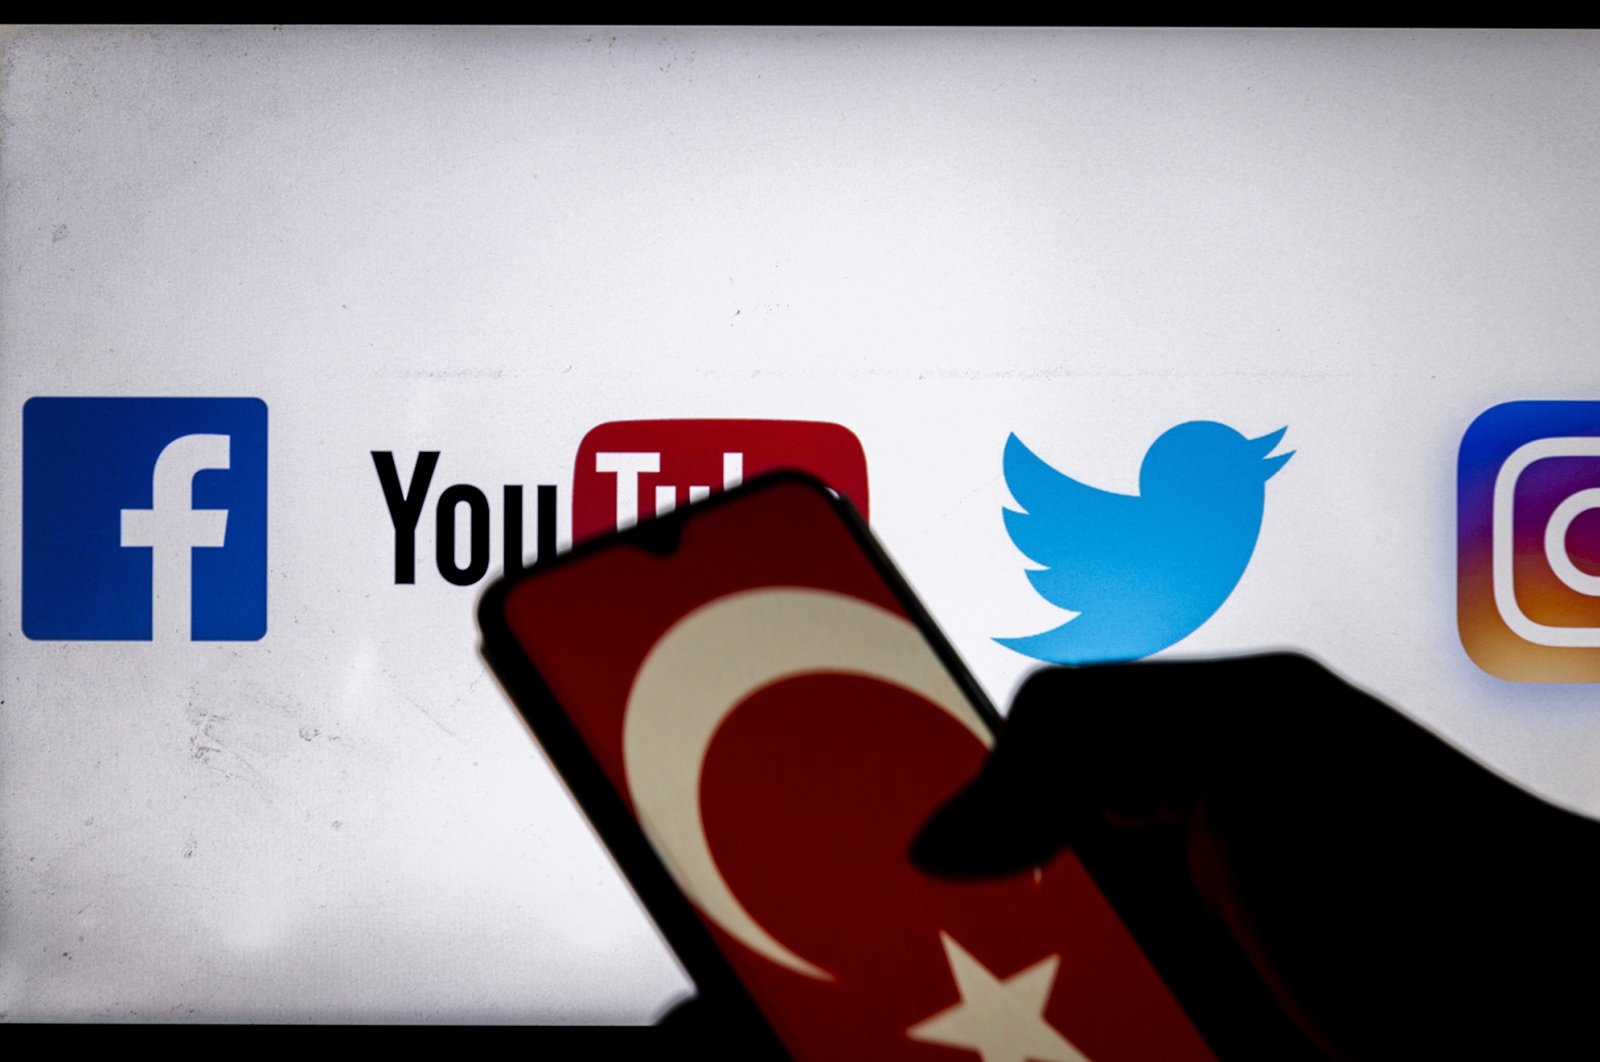 A Turkish flag is seen displayed on a smartphone with social media applications in the background, Dec. 25, 2020. (Getty Images)